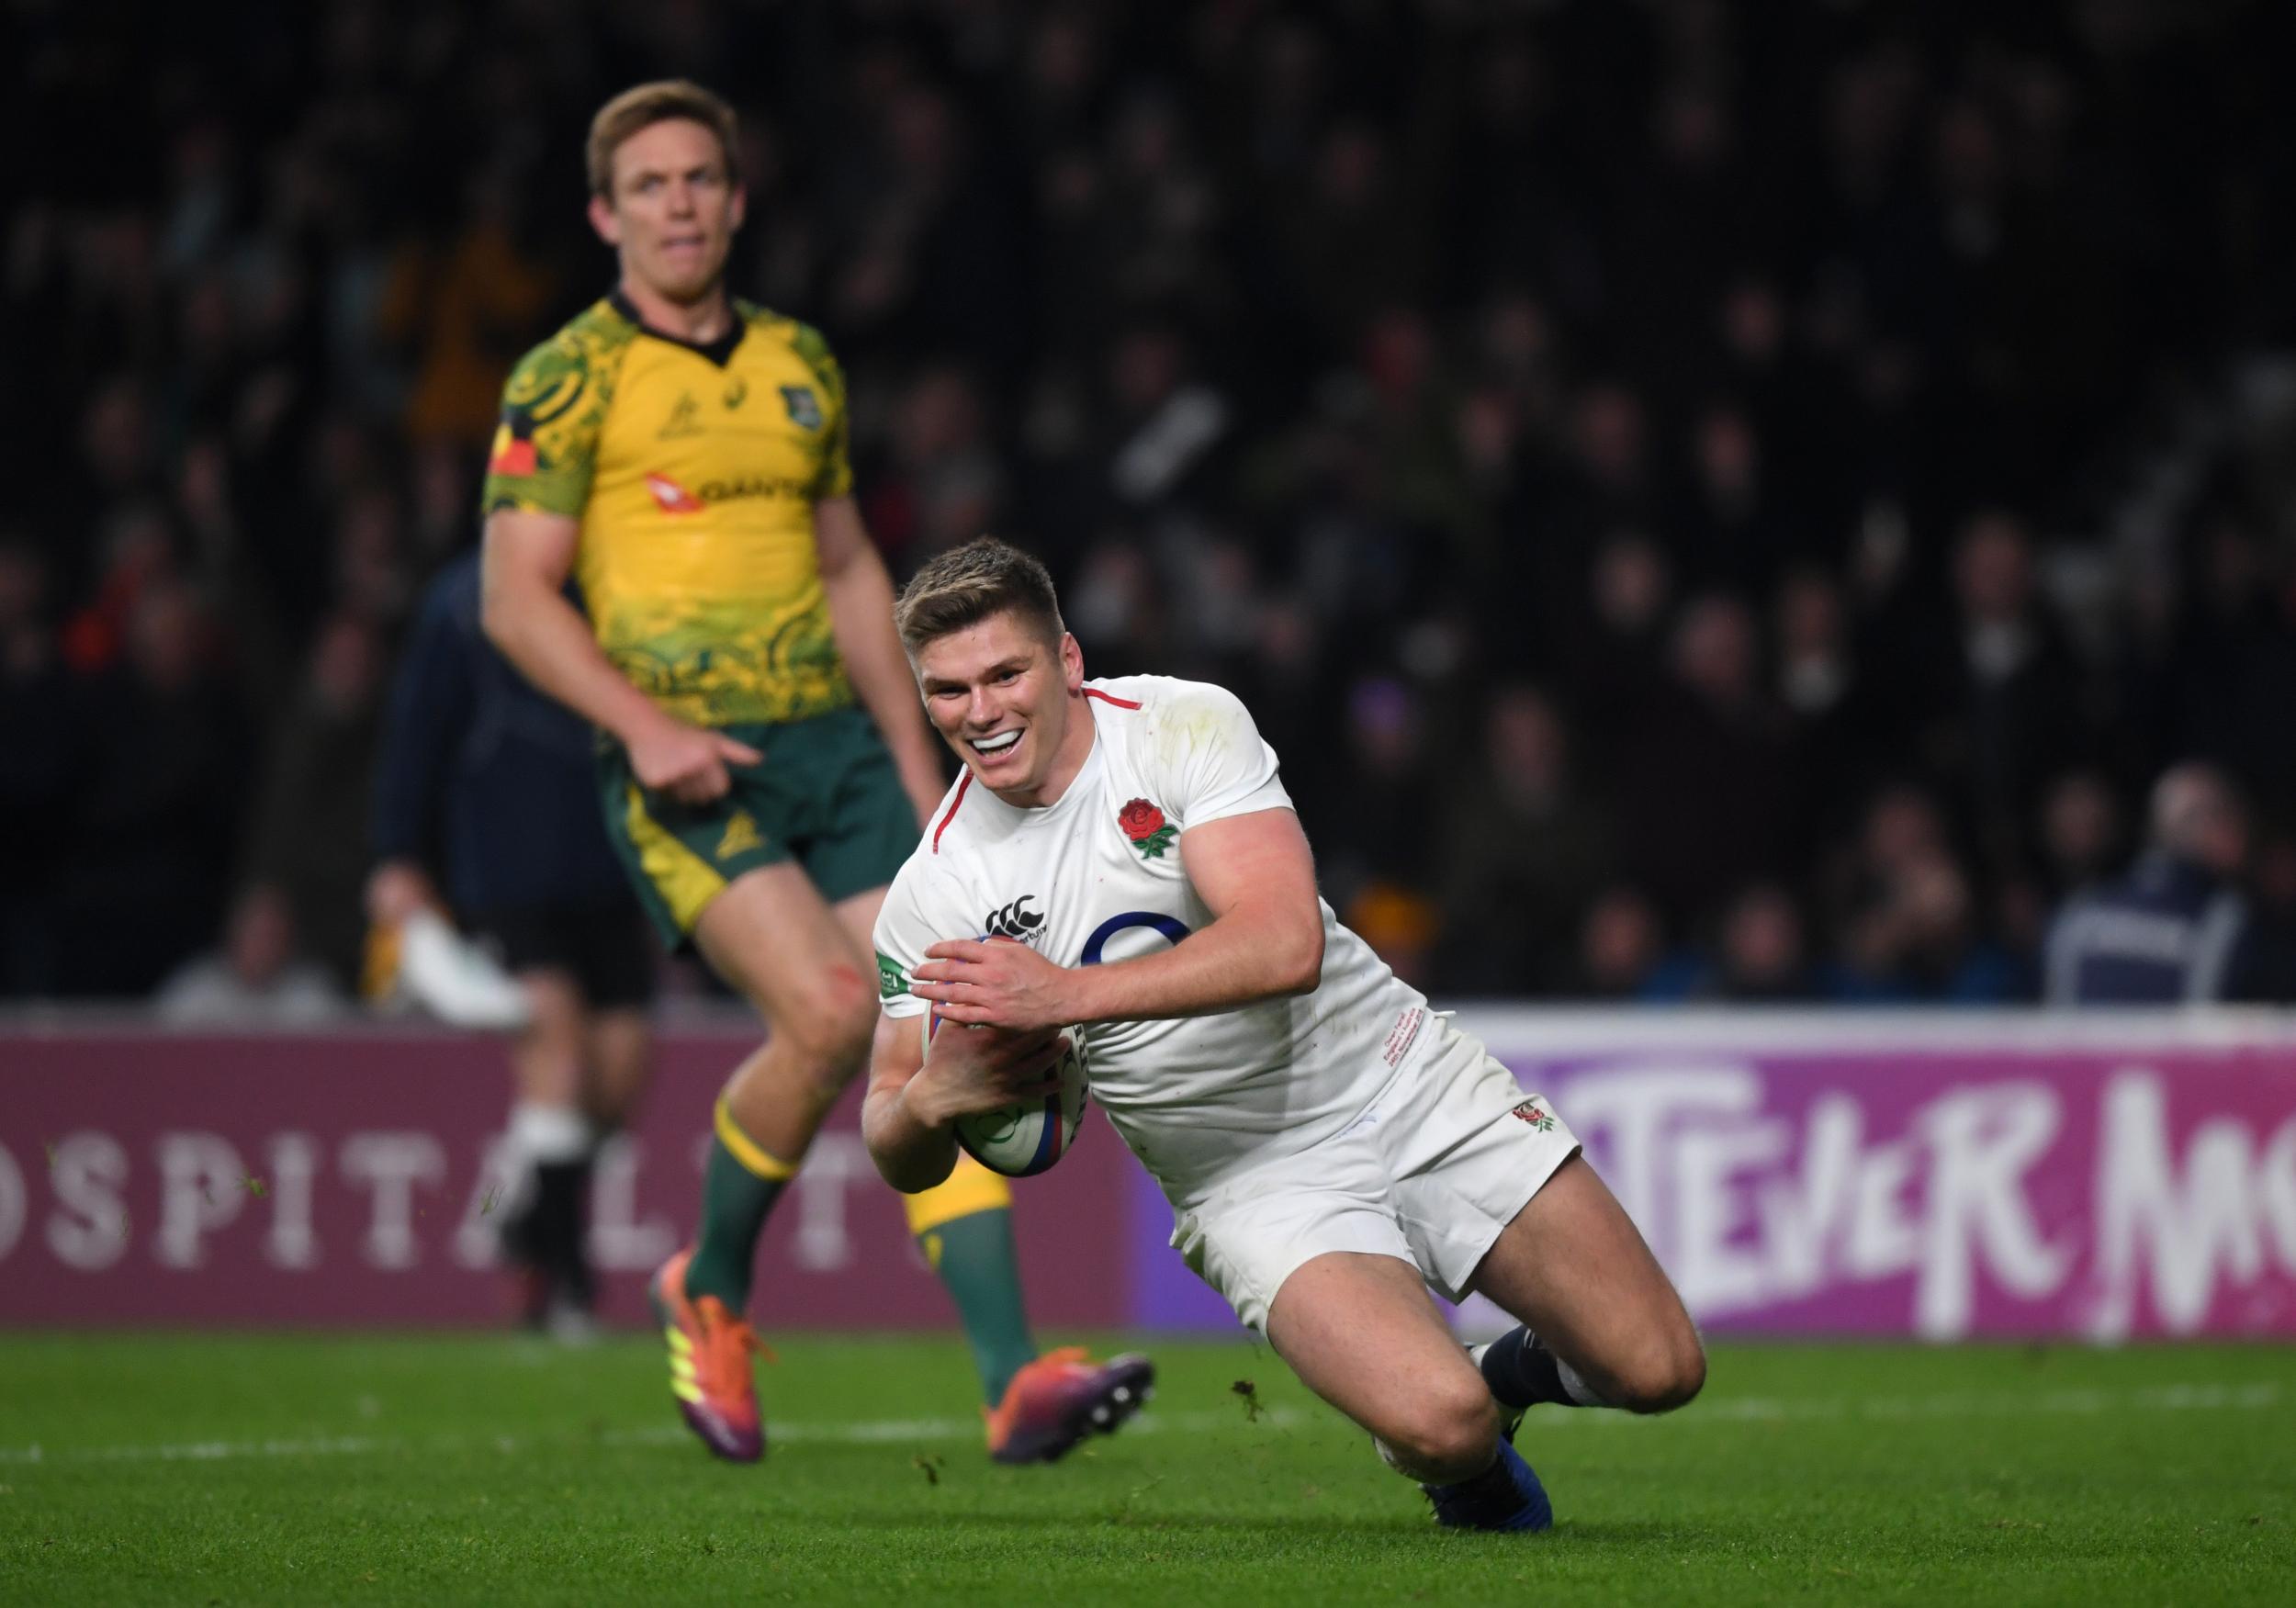 Owen Farrell was at the centre of the controversy after his tackle on Izack Rodda